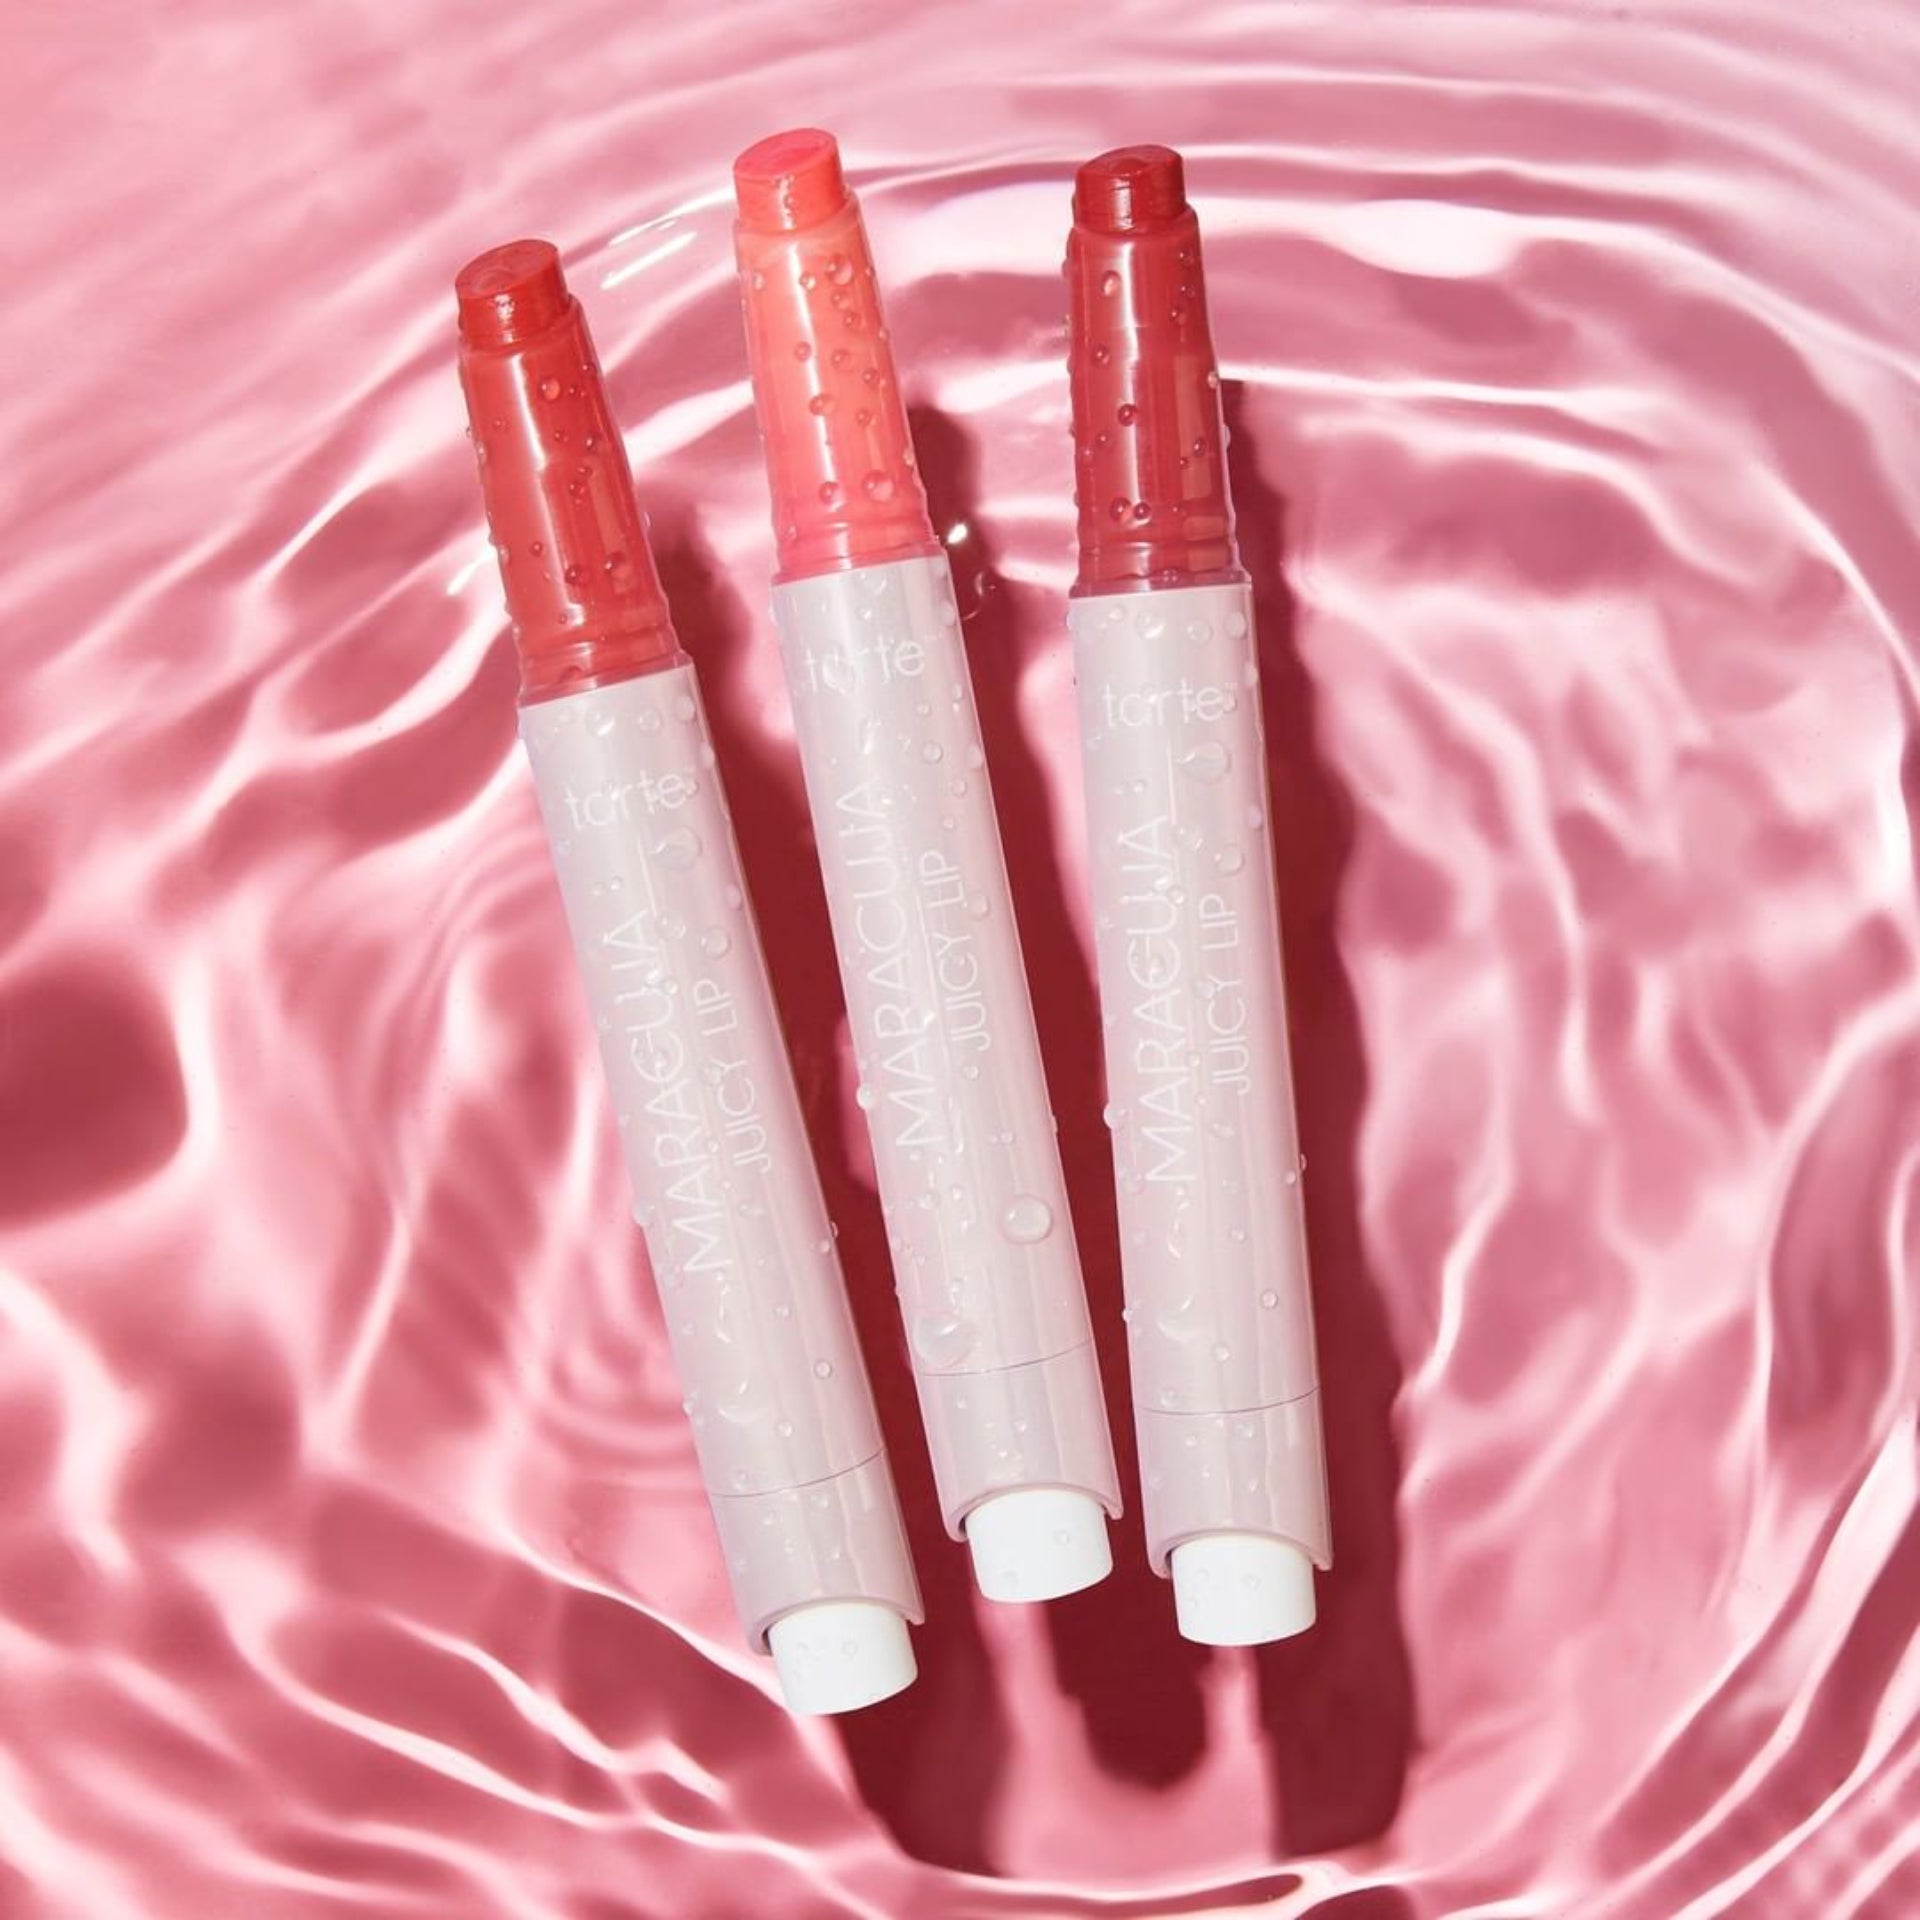 Introducing Your Newest Beauty Obsession – Tarte's Maracuja Juicy Lip Plump